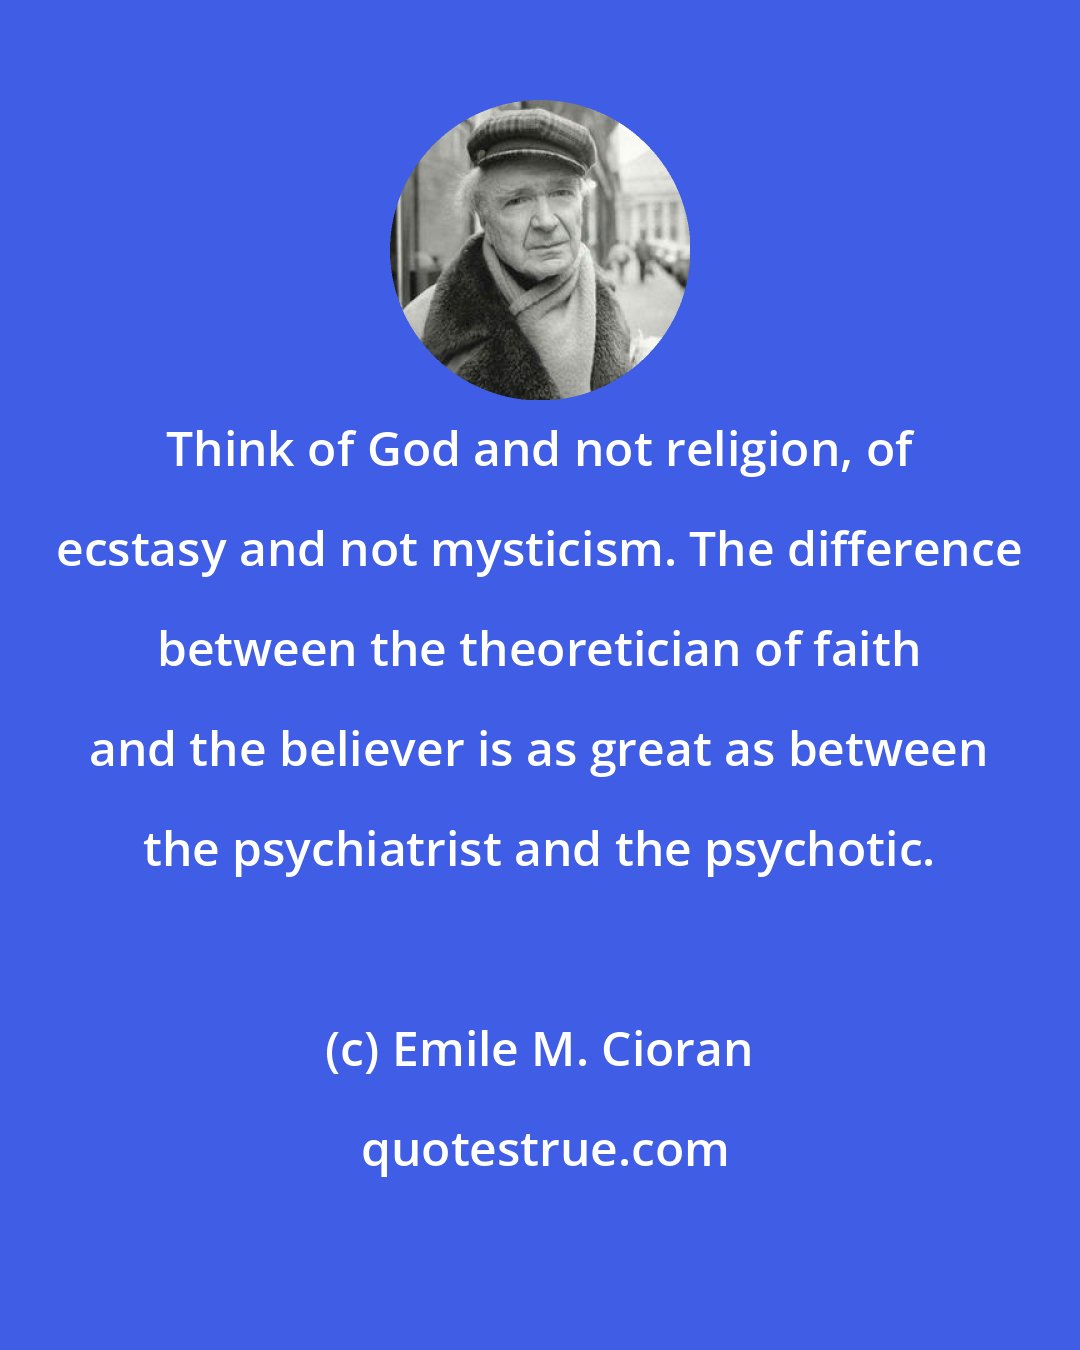 Emile M. Cioran: Think of God and not religion, of ecstasy and not mysticism. The difference between the theoretician of faith and the believer is as great as between the psychiatrist and the psychotic.